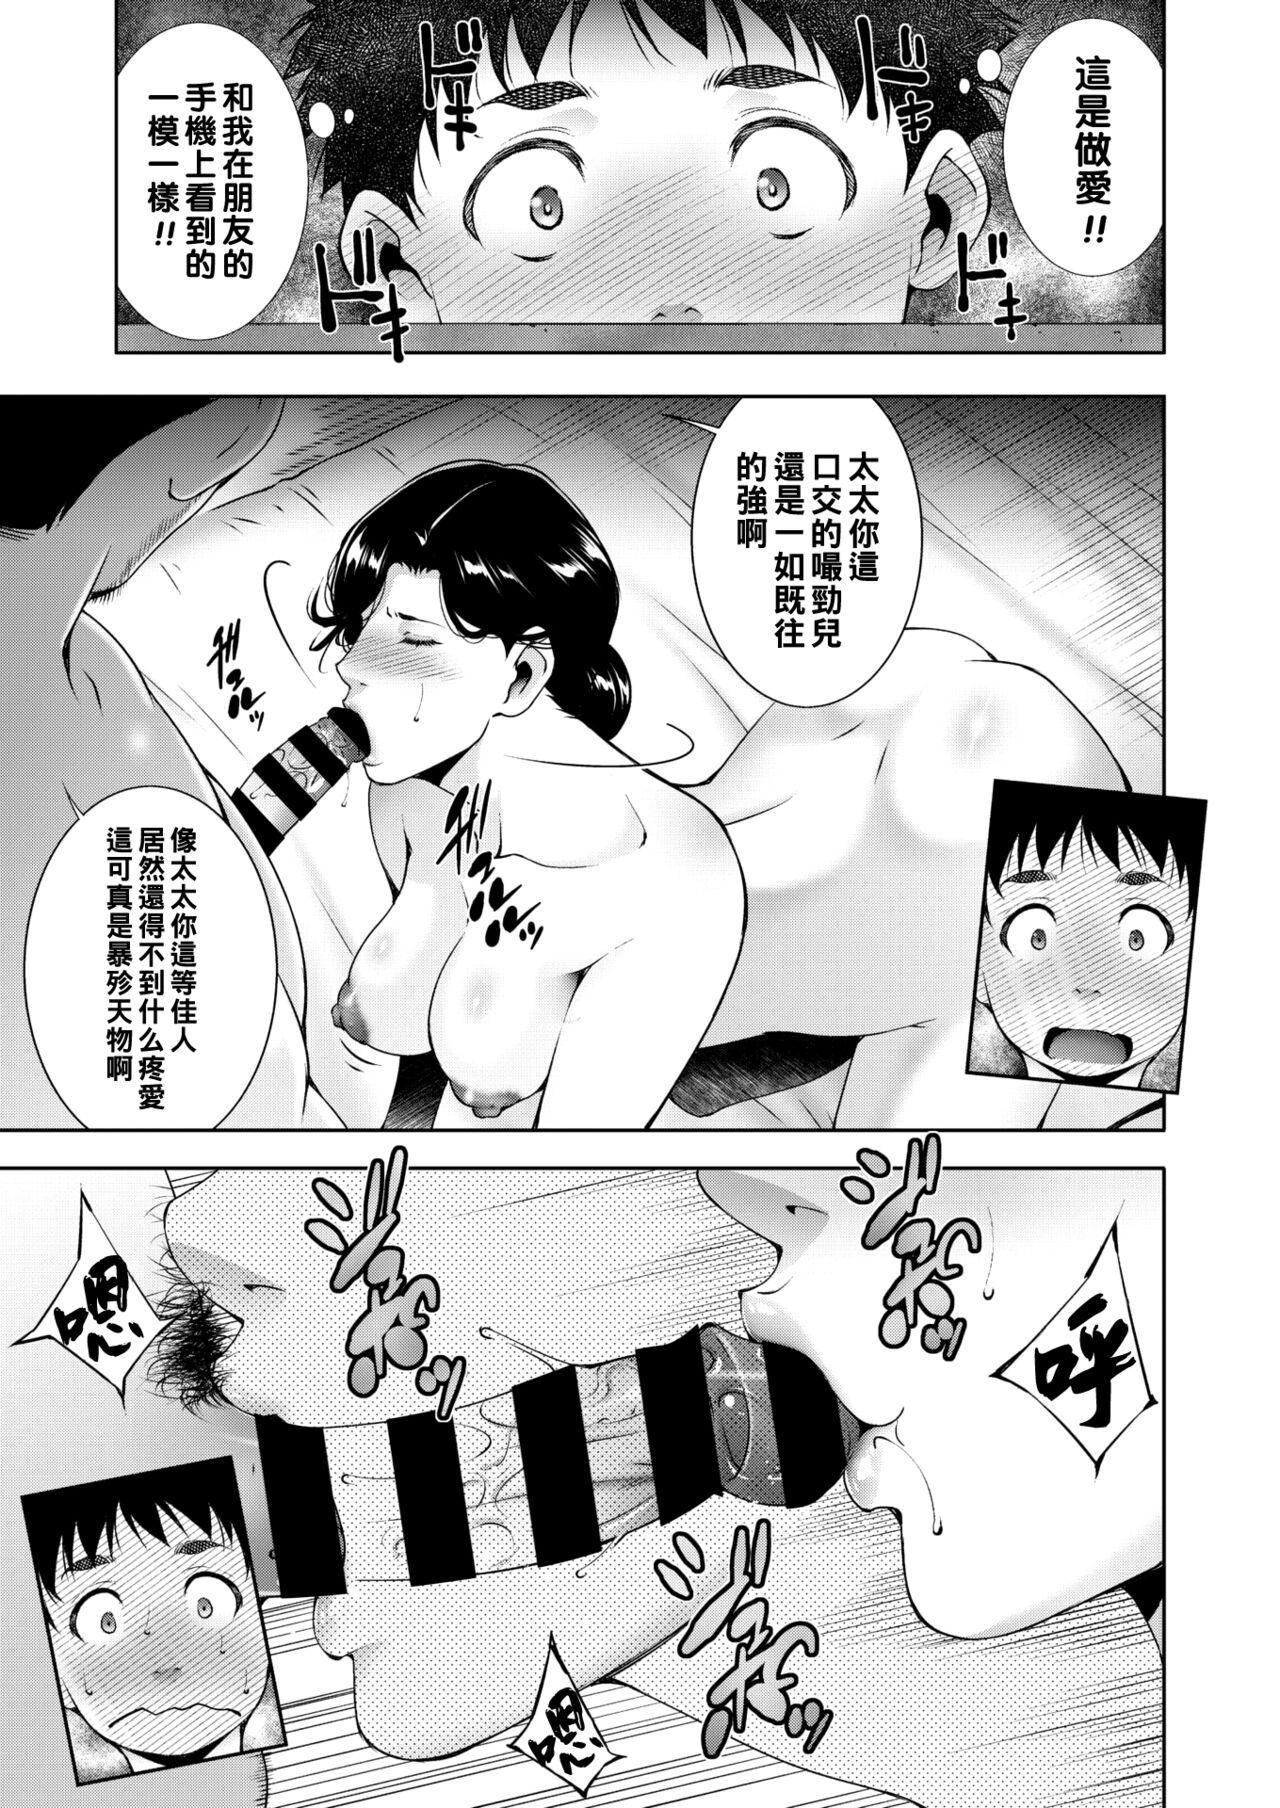 Foursome オスに成った日（Chinese） Roughsex - Page 5